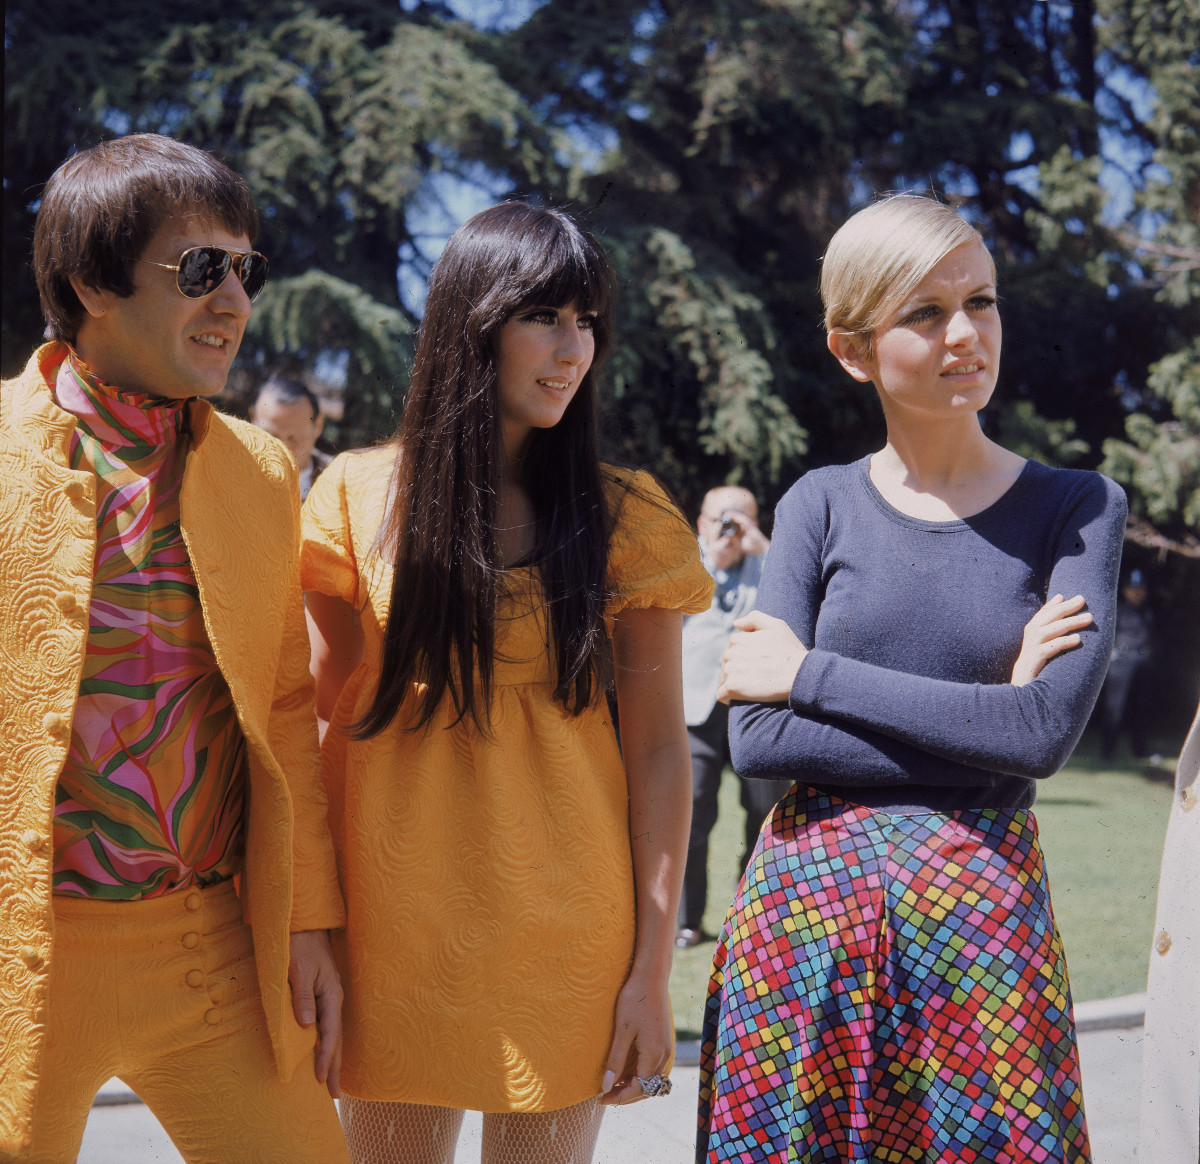 Sonny Bono, Cher and Twiggy in 1967. 